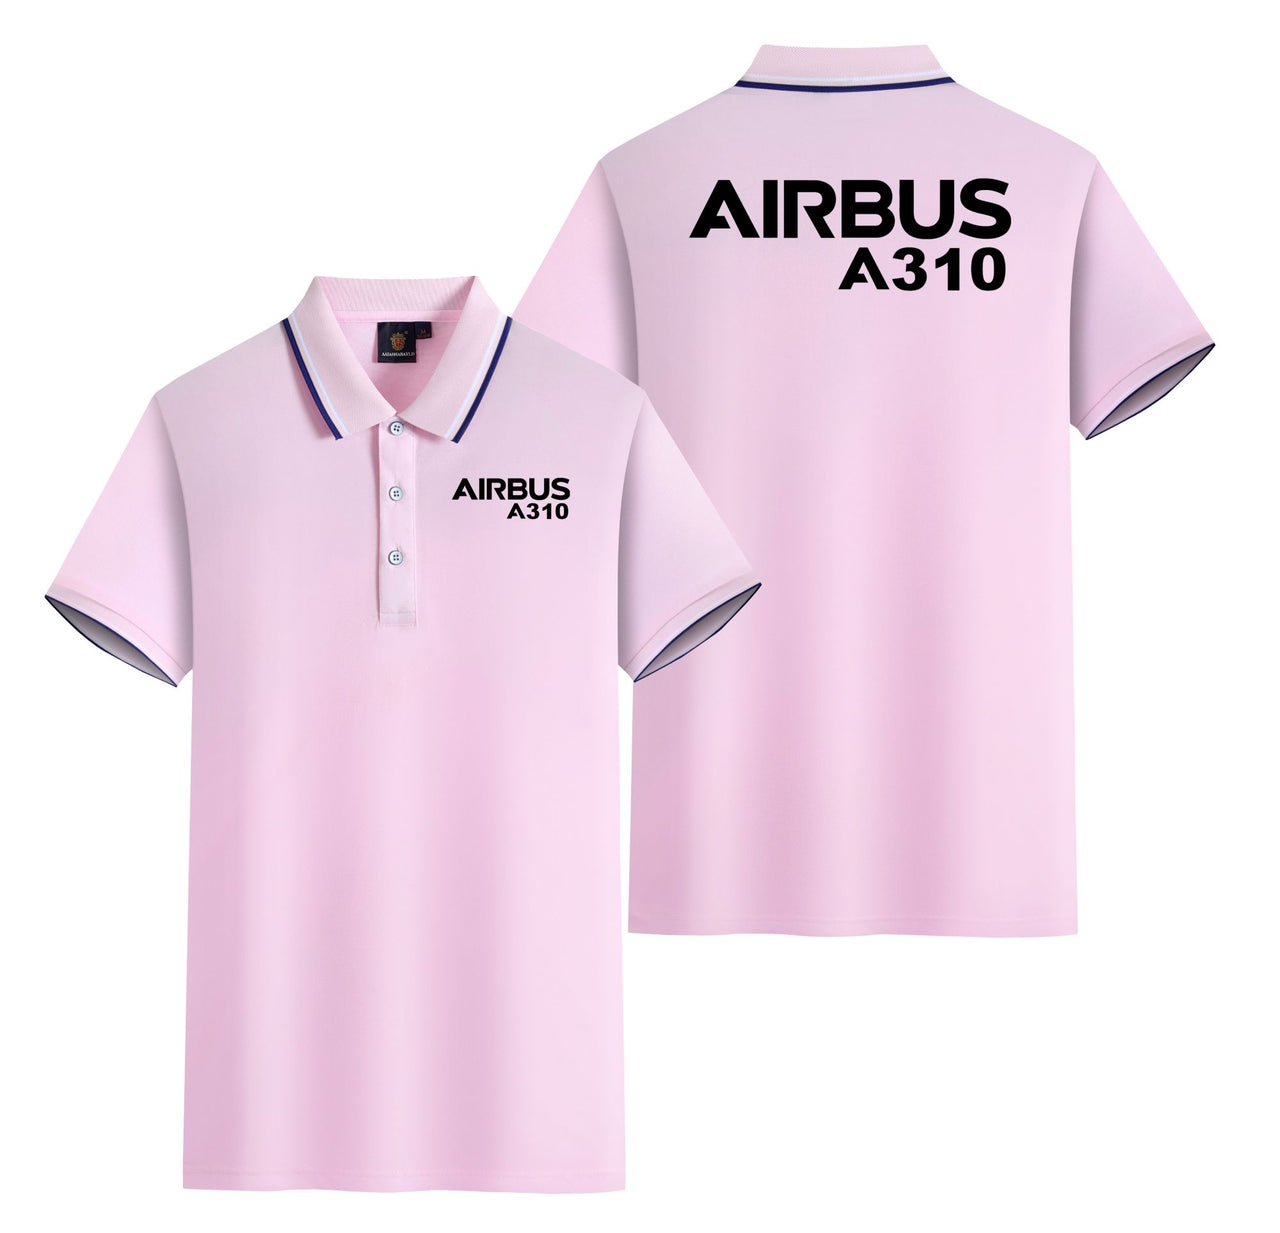 Airbus A310 & Text Designed Stylish Polo T-Shirts (Double-Side)